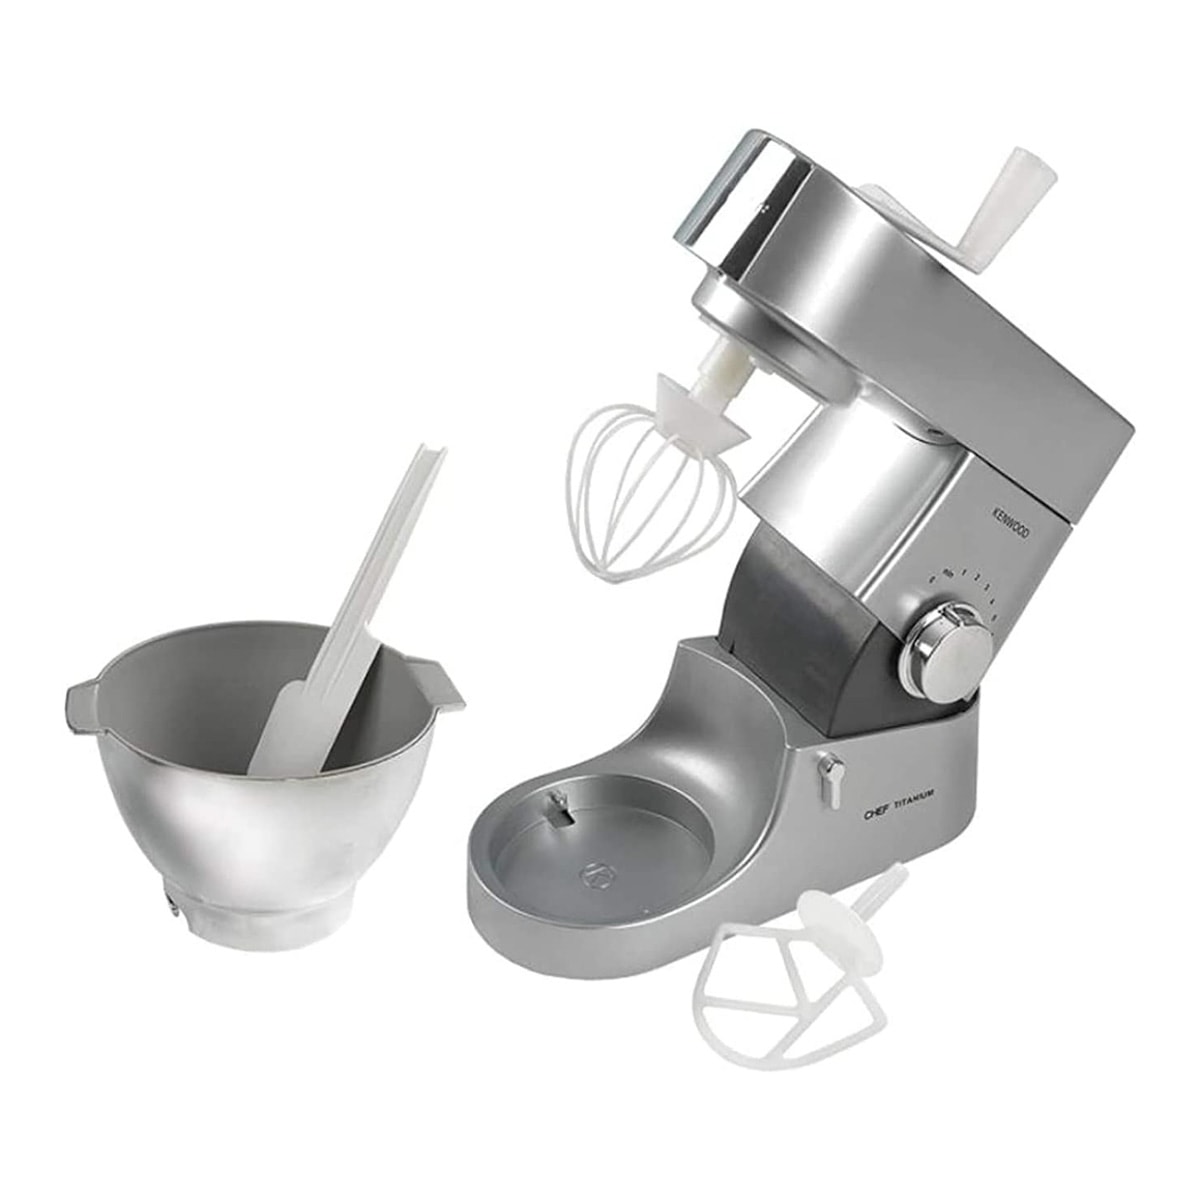 A small stainless steel-looking stand mixer with a matching bowl, two white attachments and a white spatula.